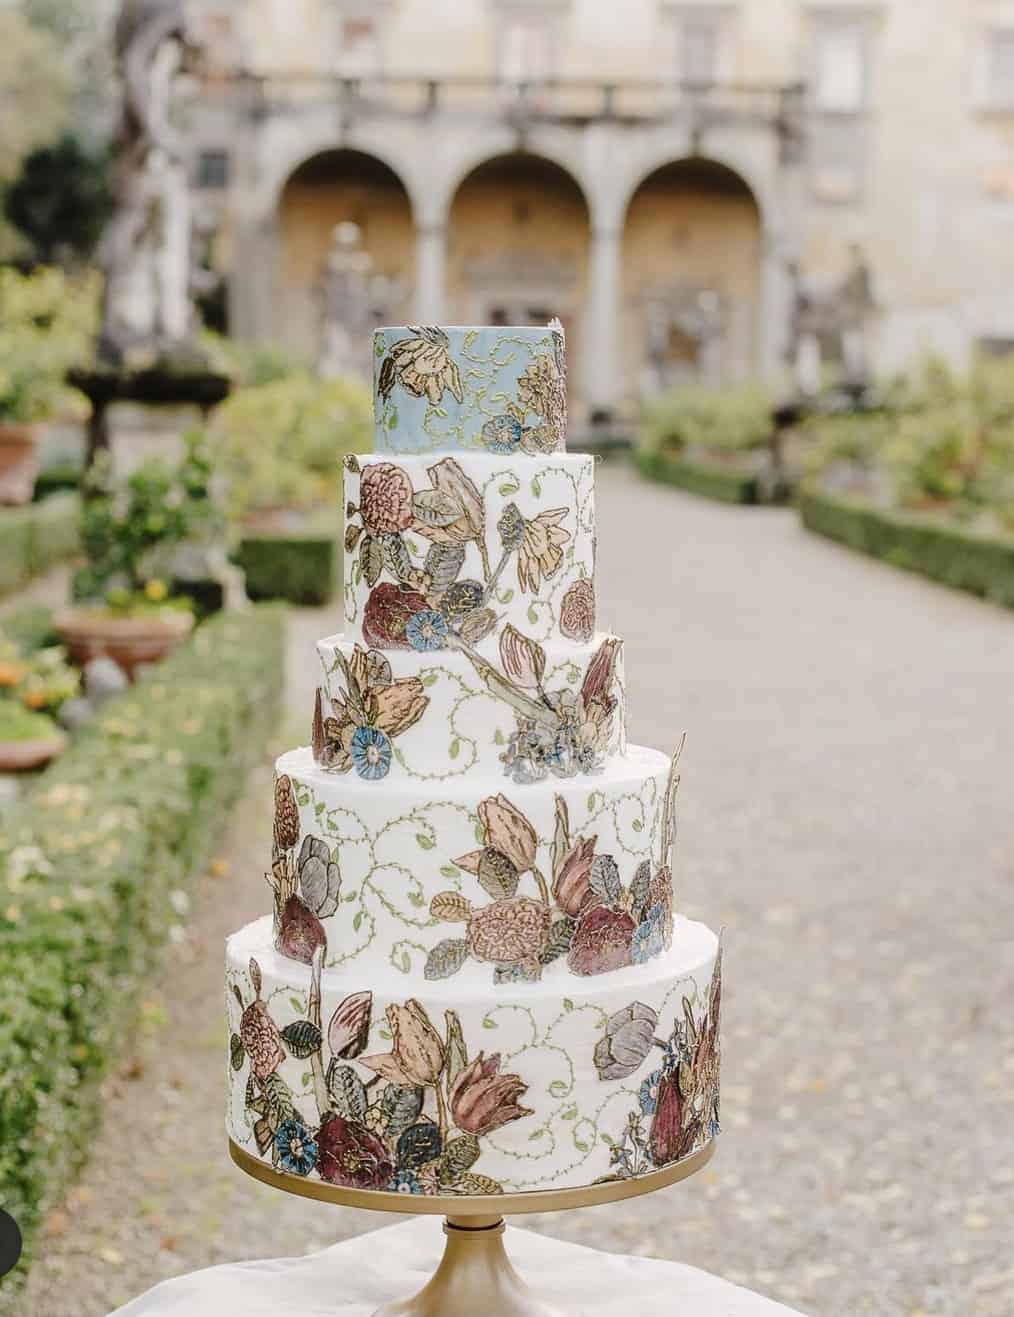 One of a kind wedding cake with hand painted floral design